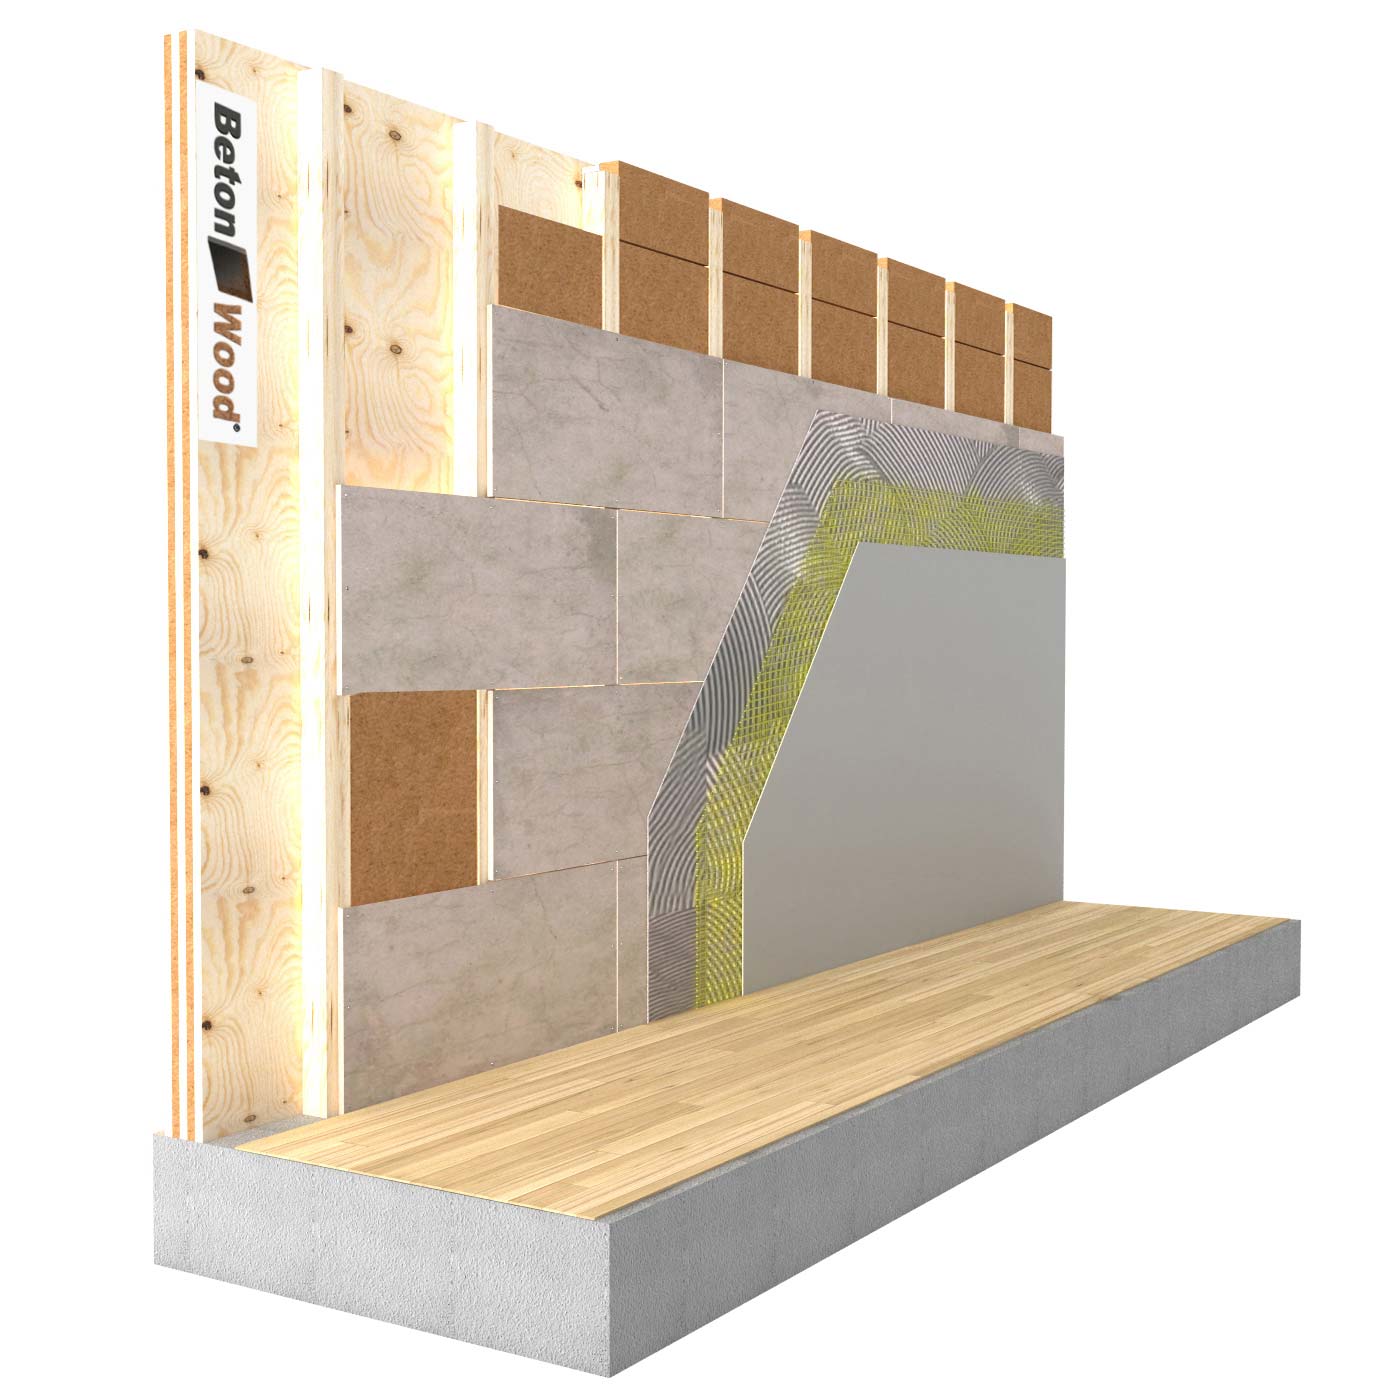 Internal insulation system with Therm dry fiber wood on wooden walls